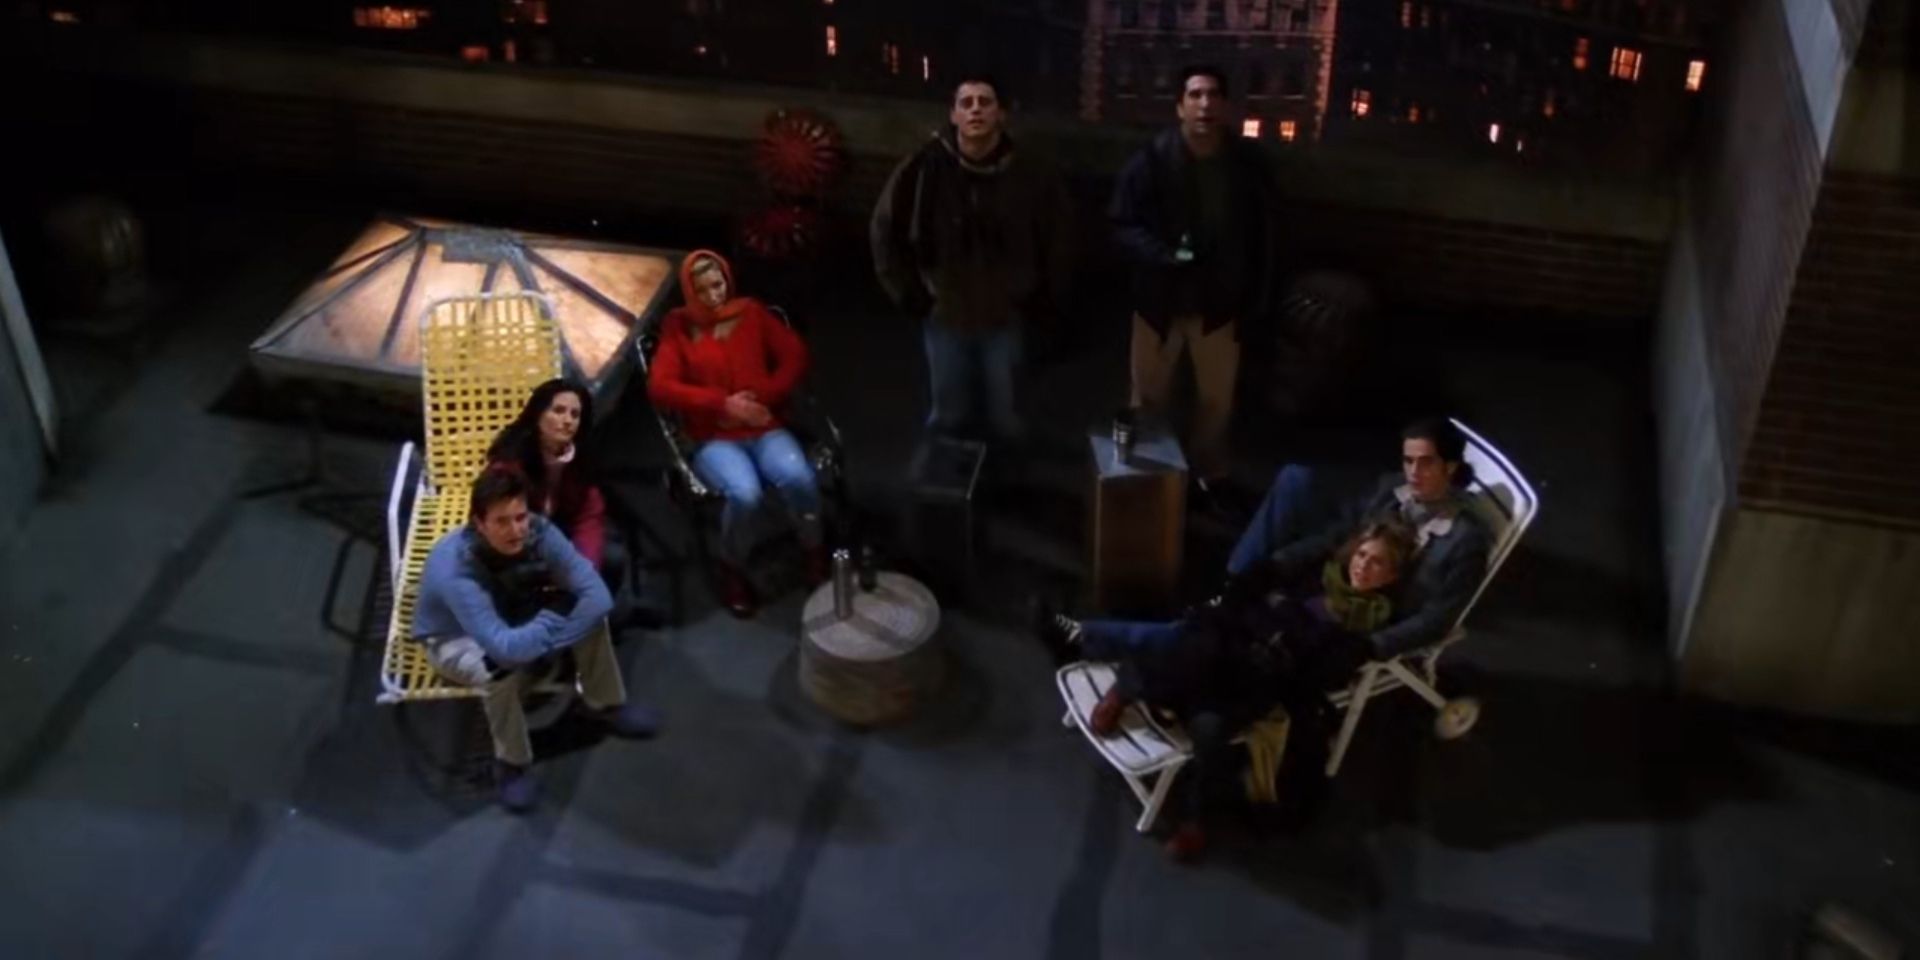 Friends Season 7, Episode 12, “The One Where They’re Up All Night”